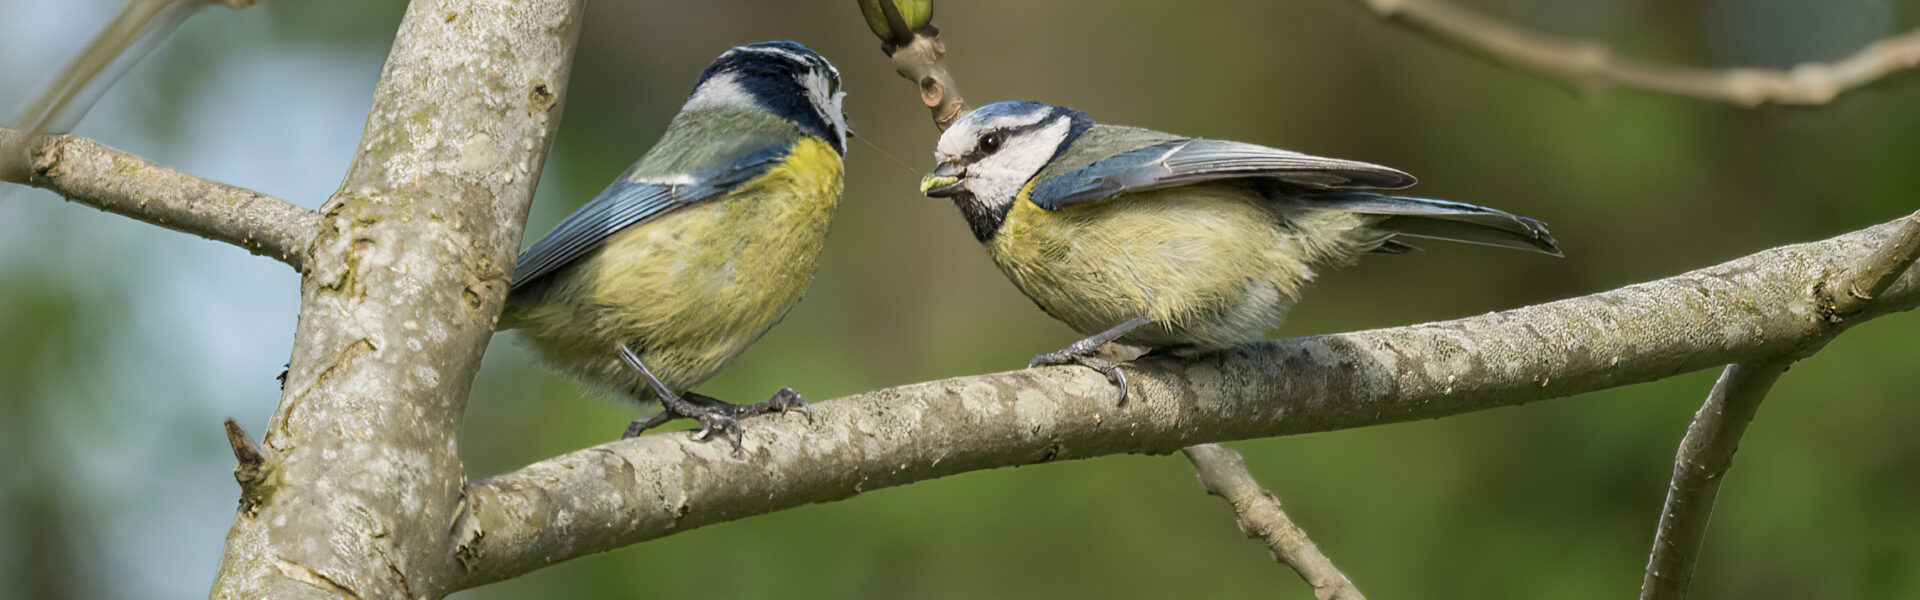 A photograph of two blue tits on a tree branch.